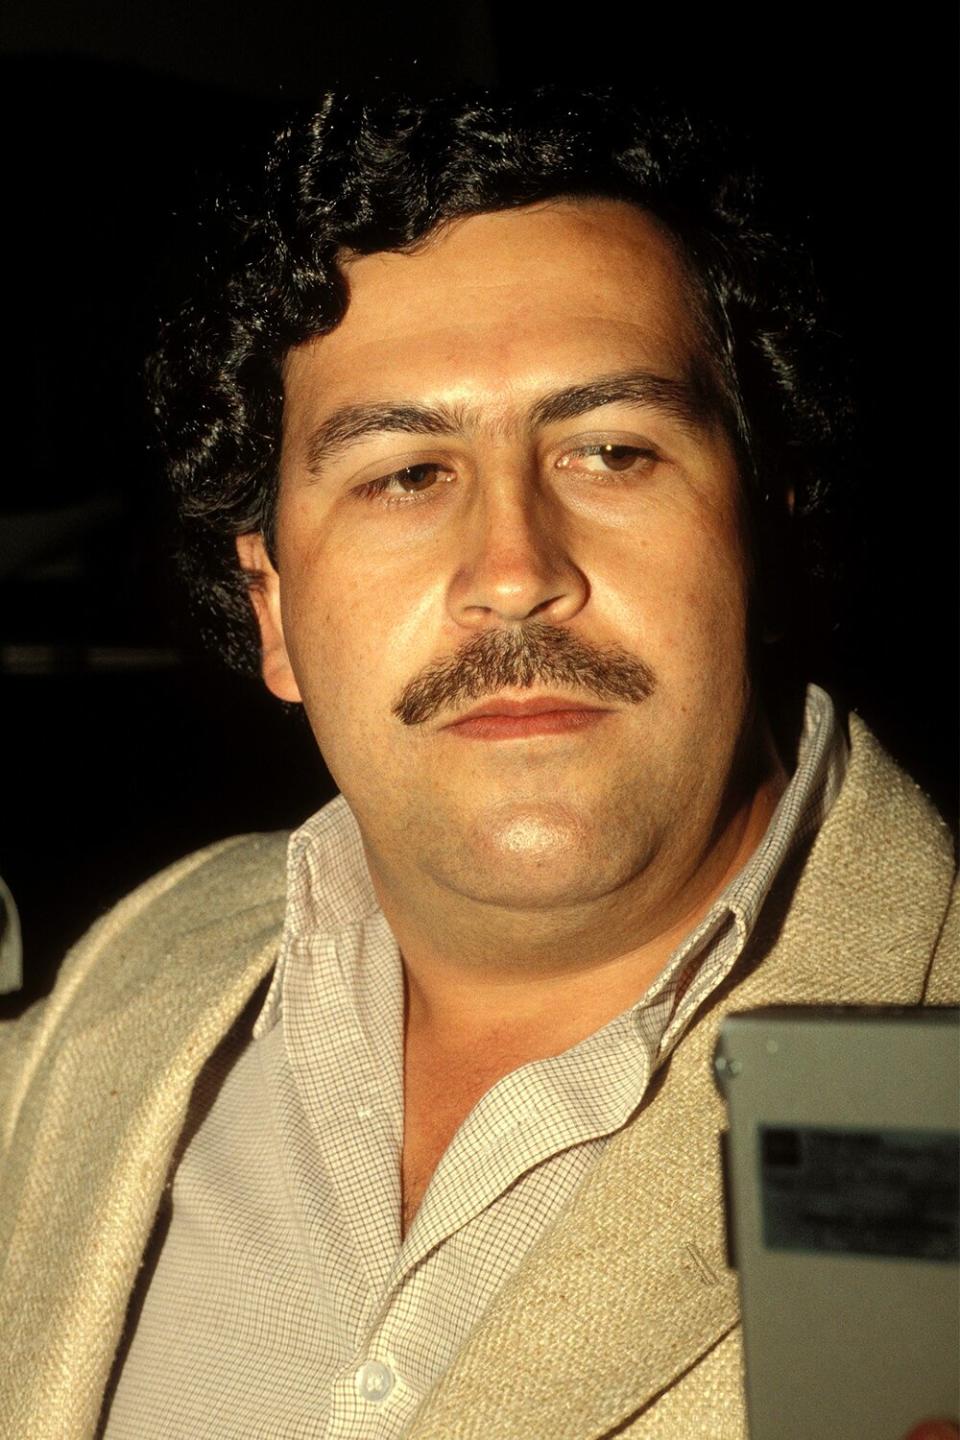 Pablo Escobar the godfather of the Medellin Cartel in 1988. The concrete 'Monaco' building in the Colombian city of Medellin, once home to drug baron Pablo Escobar, is set to be razed to the ground on February 22, 2019 with explosives to make way for a park dedicated to the victims of the Colombia's drug war. The city was at the centre of the conflict largely due to Escobar, who ran the cartel that at its peak supplied 80 per cent of America's cocaine. Appearing like a fortress with a penthouse apartment on top, the Edificio Monaco was home to Escobar and his family until rivals set off a car bomb outside in 1988. They vacated not long after. In the place of the uninhabited structure in El Poblado, an exclusive neighbourhood of Medellin, will be built a 5,000 square meter commemorative space to honor the thousands of victims killed during the 1980s and 90s as drug traffickers fought a bloody war against the authorities. Photo by Eric Vandeville/Abaca/Sipa USA